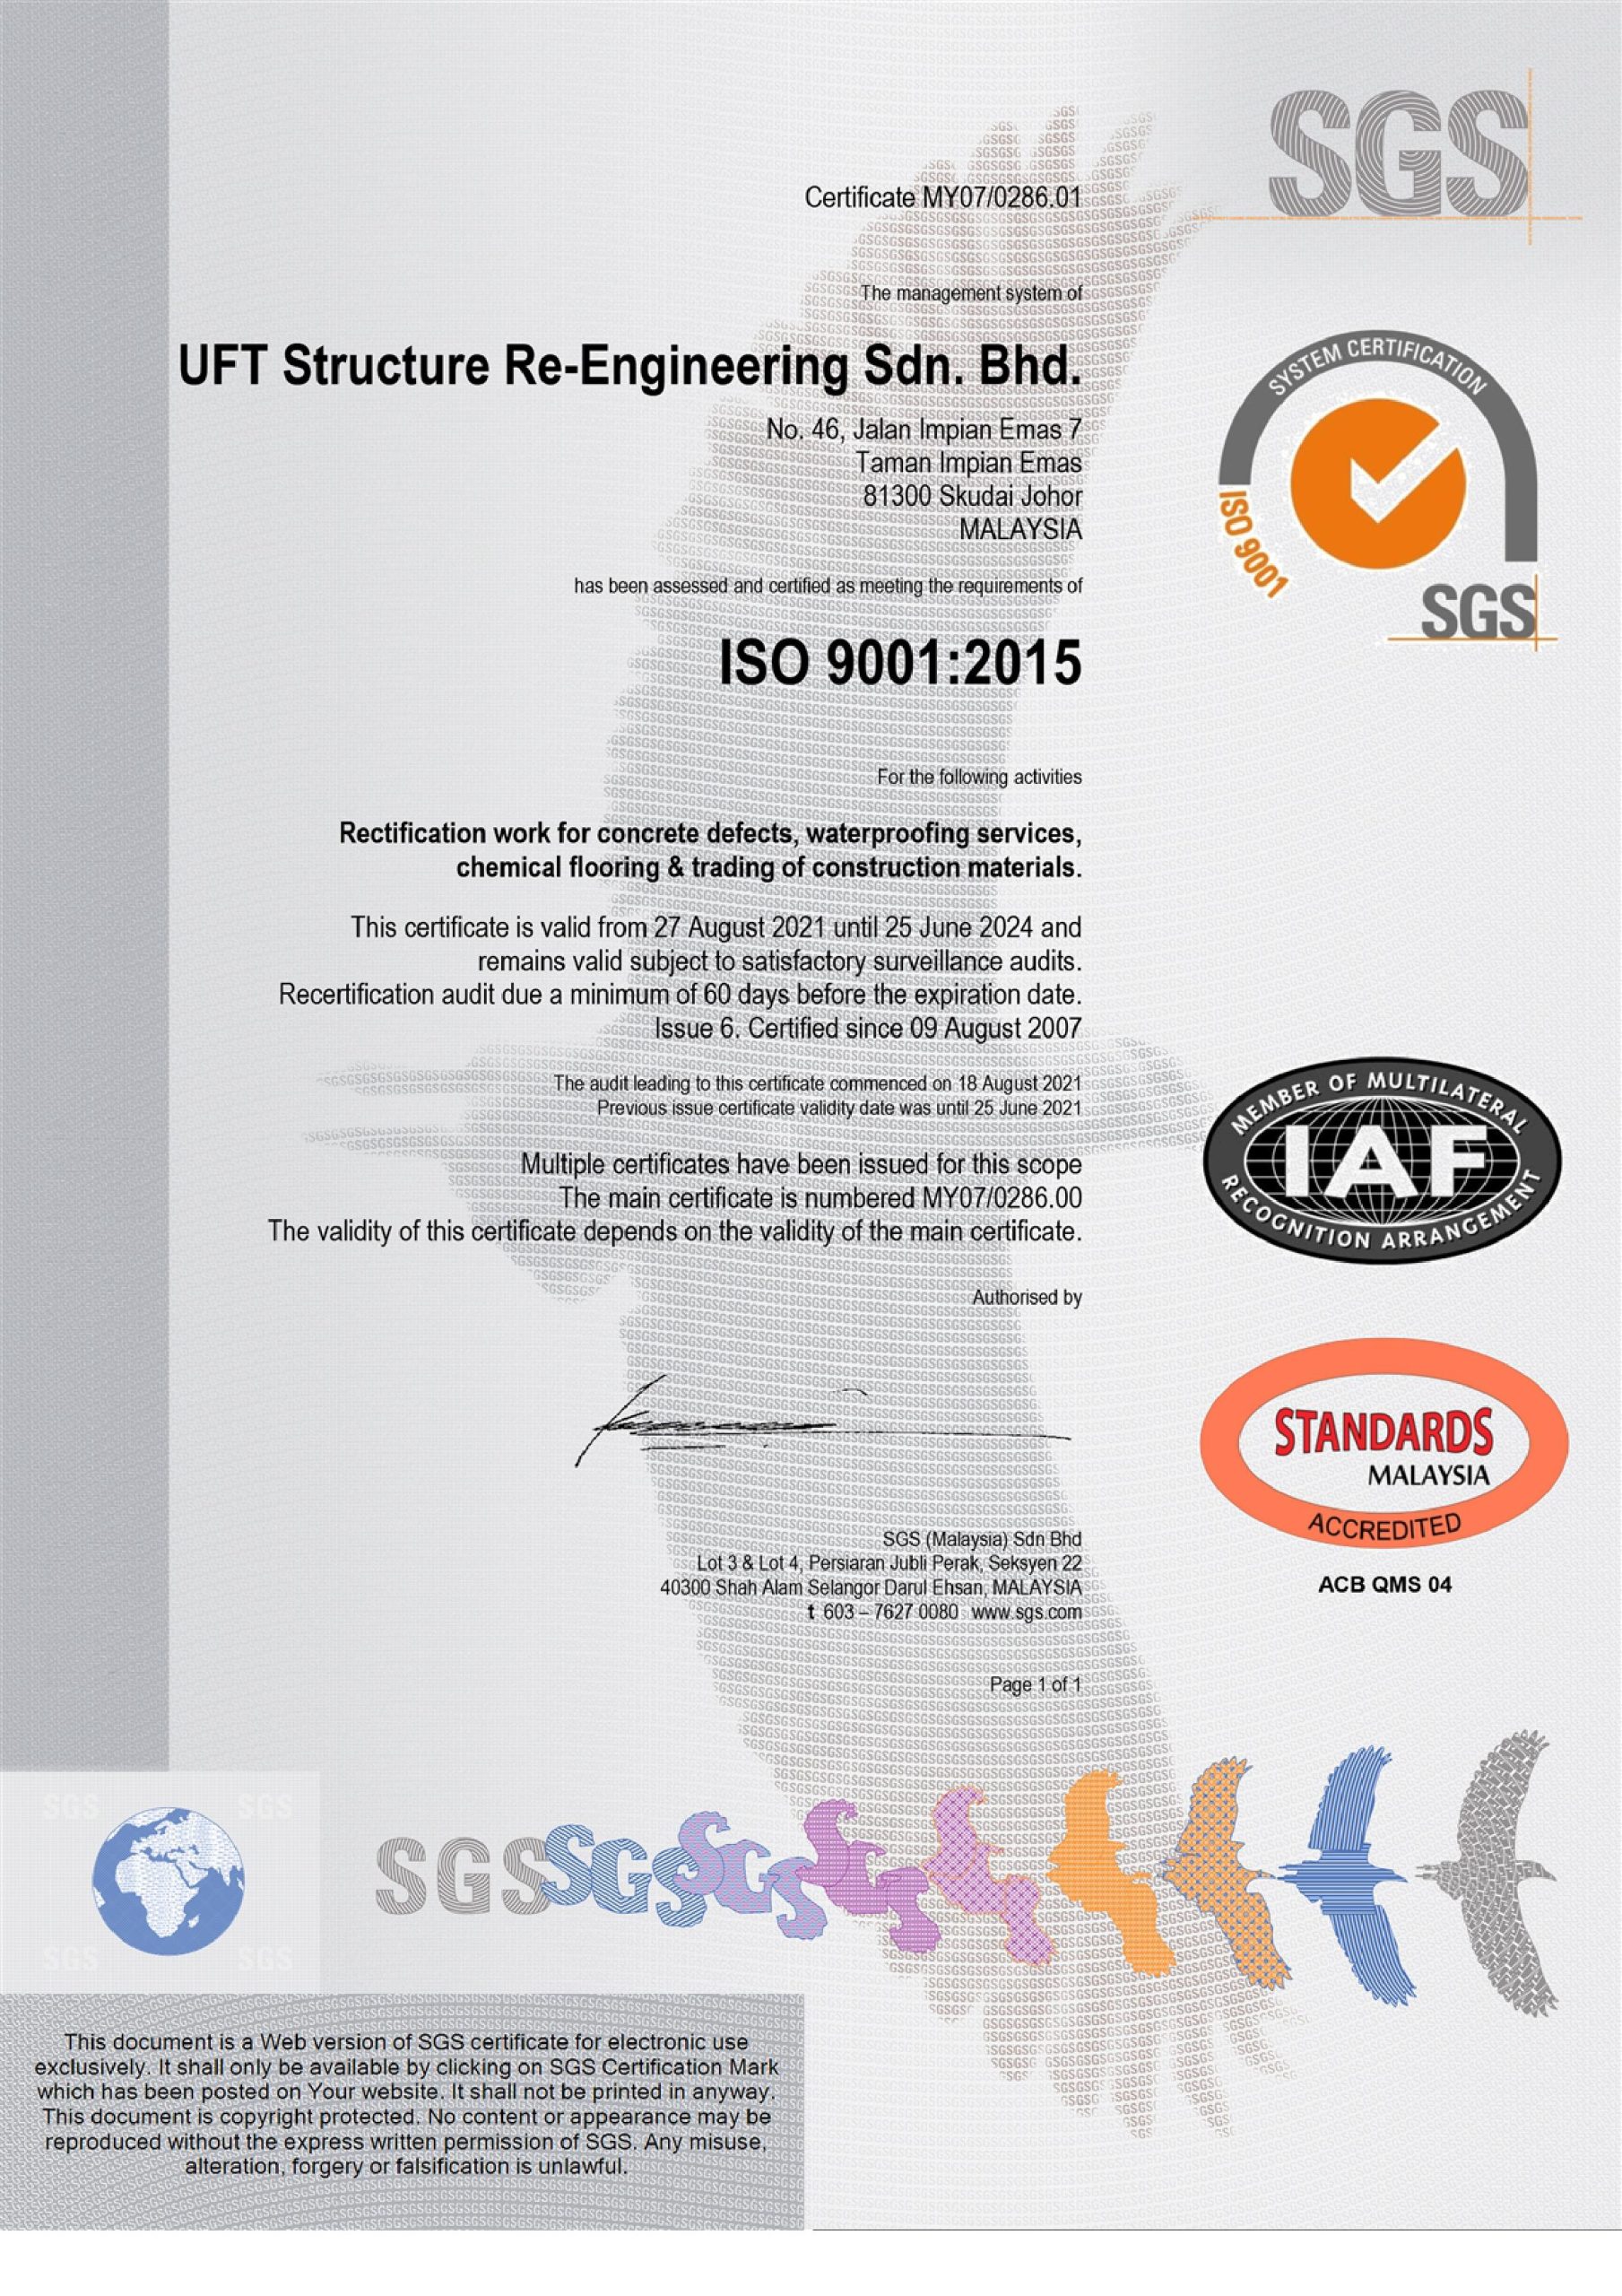 Certificate of ISO UFT Standards Malaysia